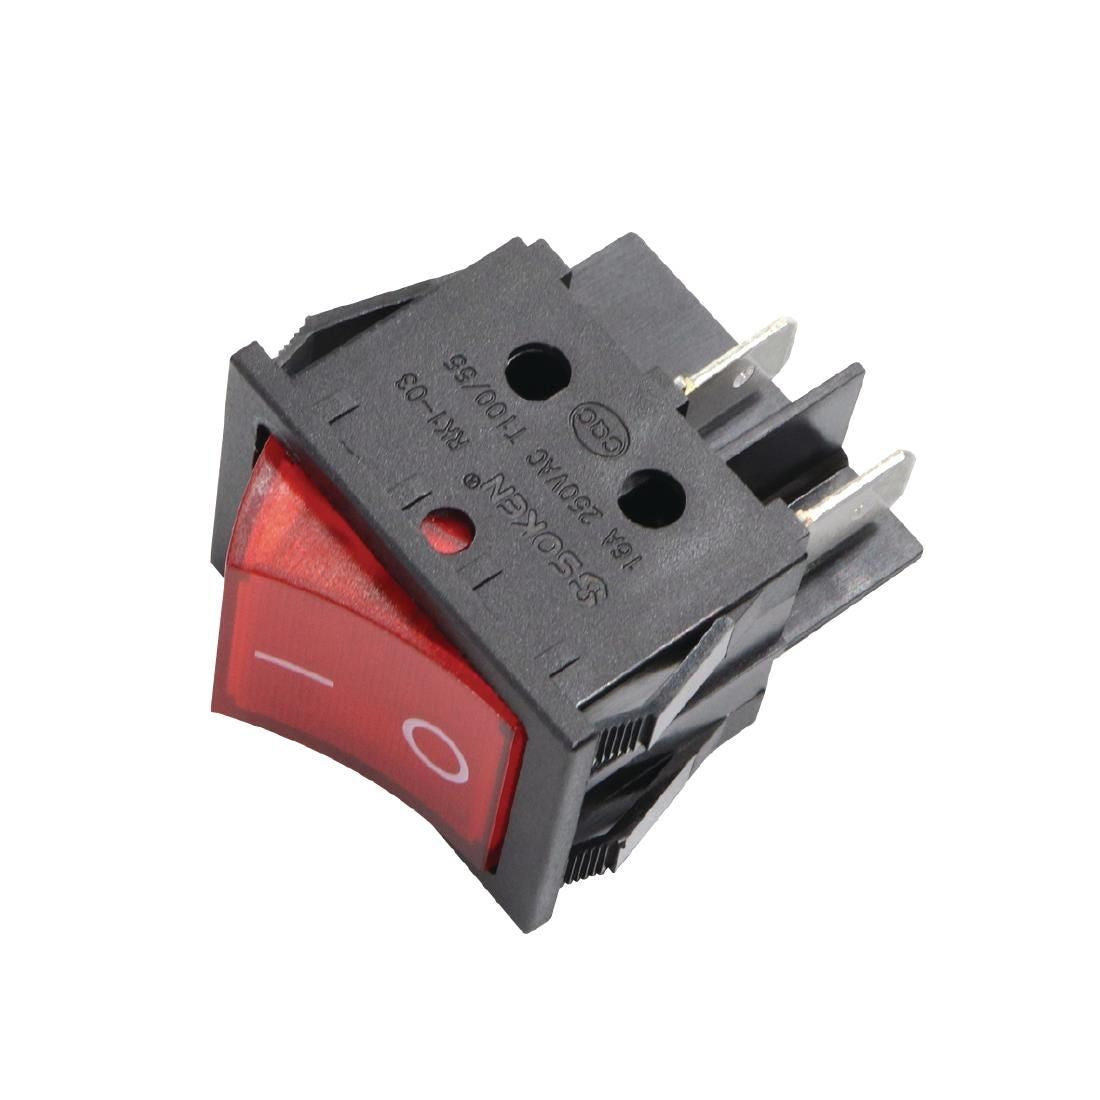 AF595 Replacement Switch for CW147 CW148 GL178